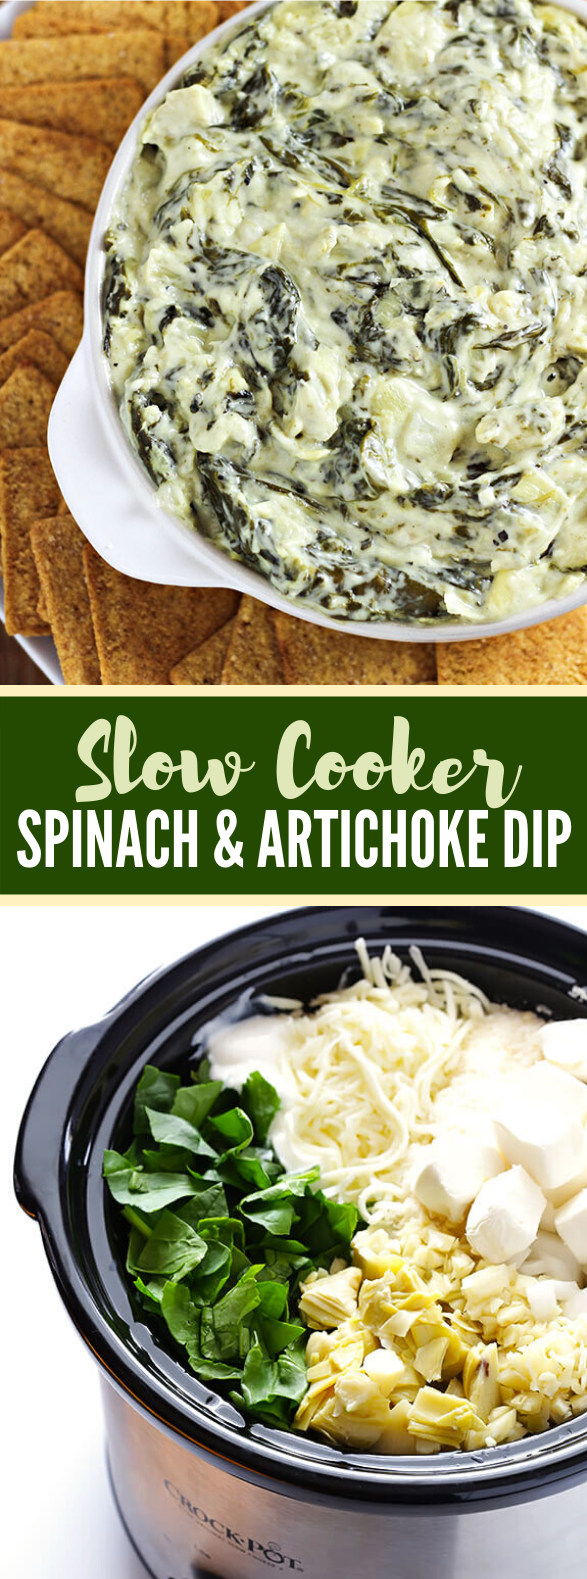 Slow Cooker Spinach and Artichoke Dip Recipe #appetizers #dinner